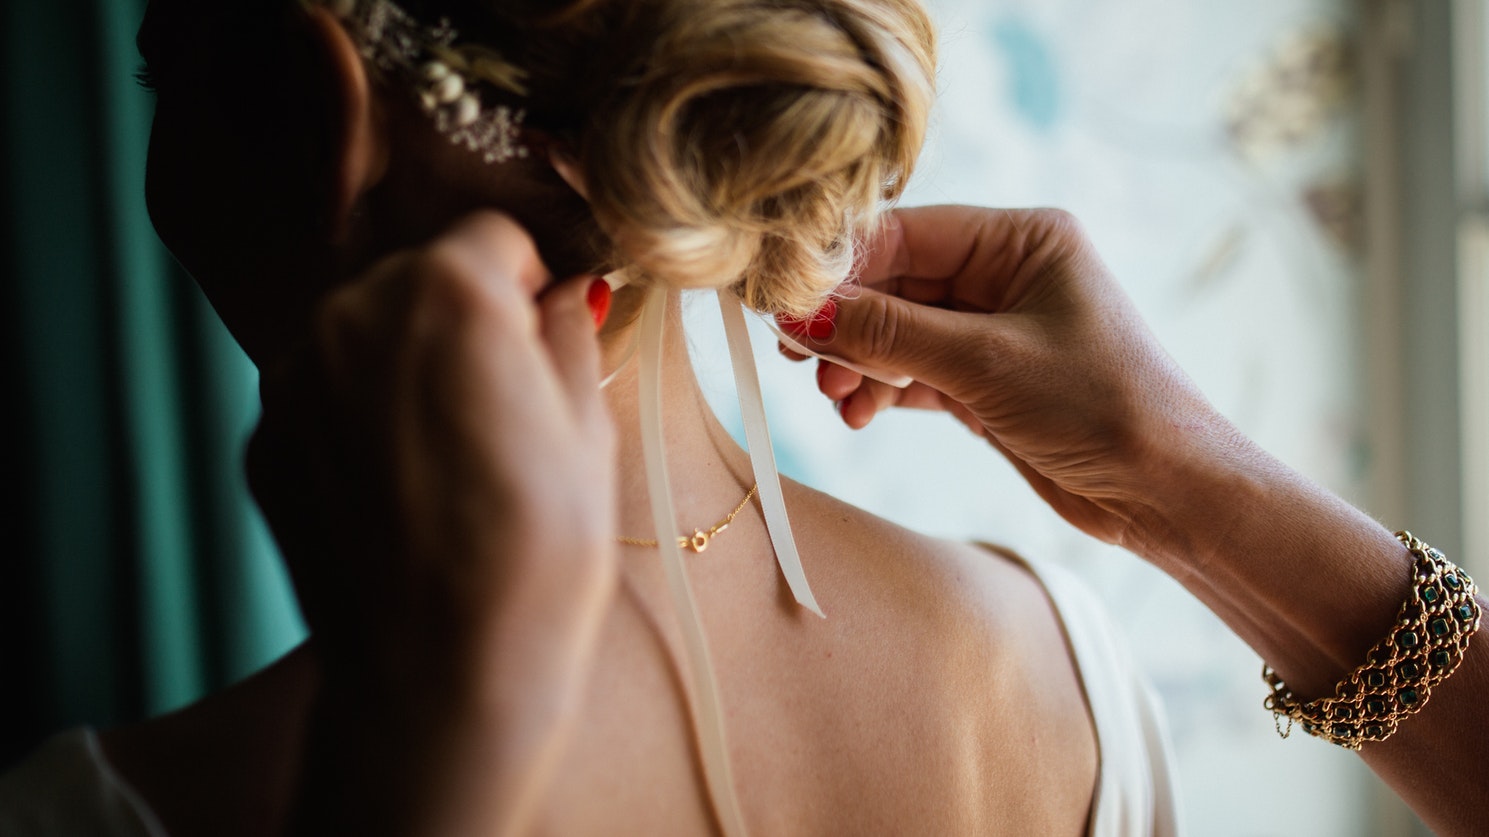 Bridal Hair Care Tips: How To Prep For The Wedding Day